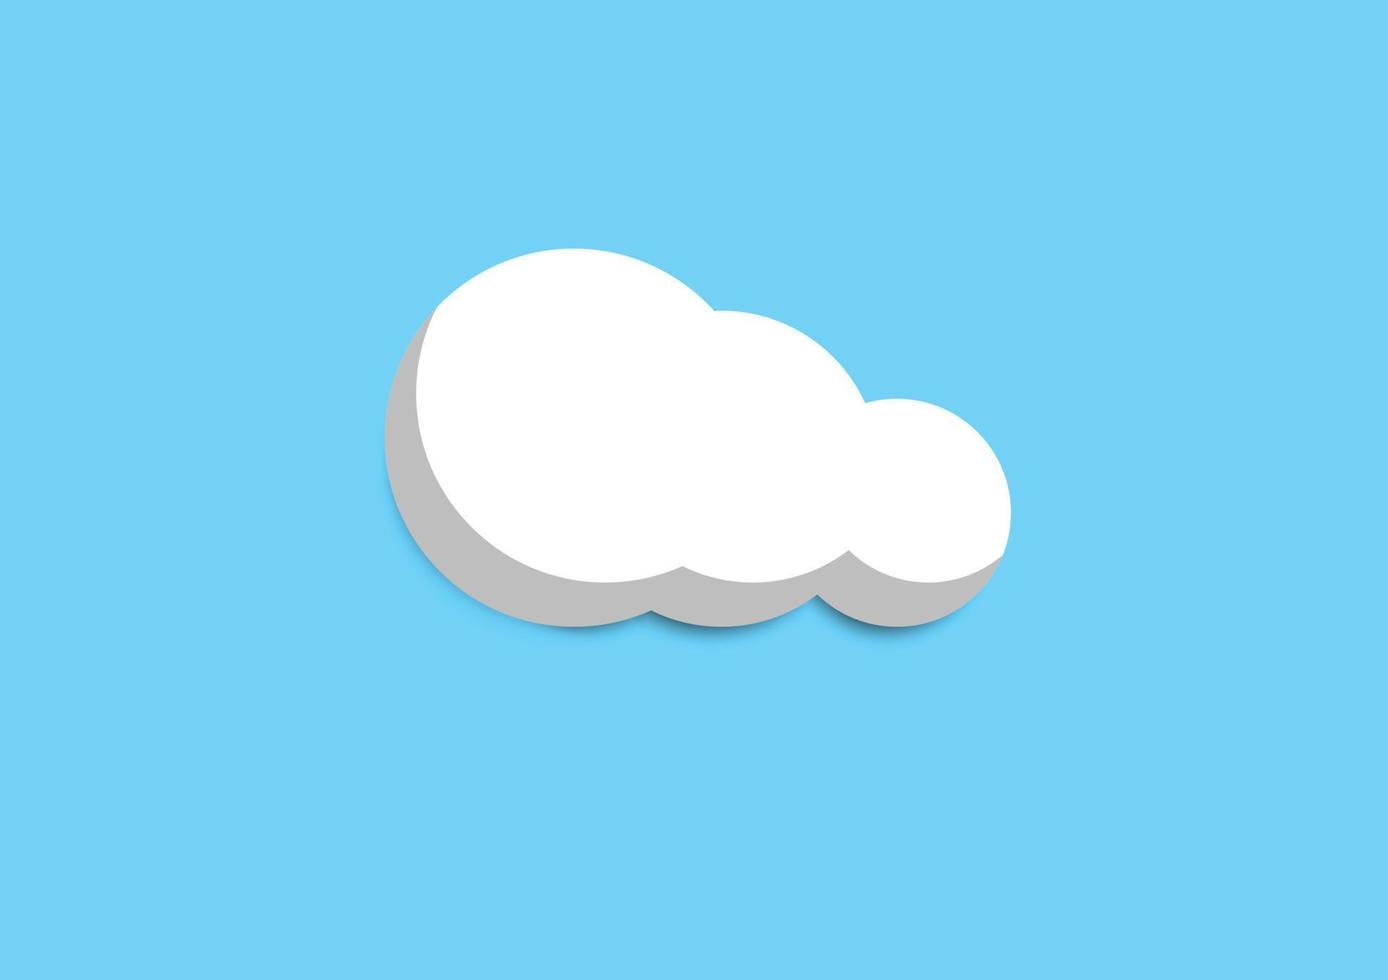 shapes of white clouds on a blue background vector